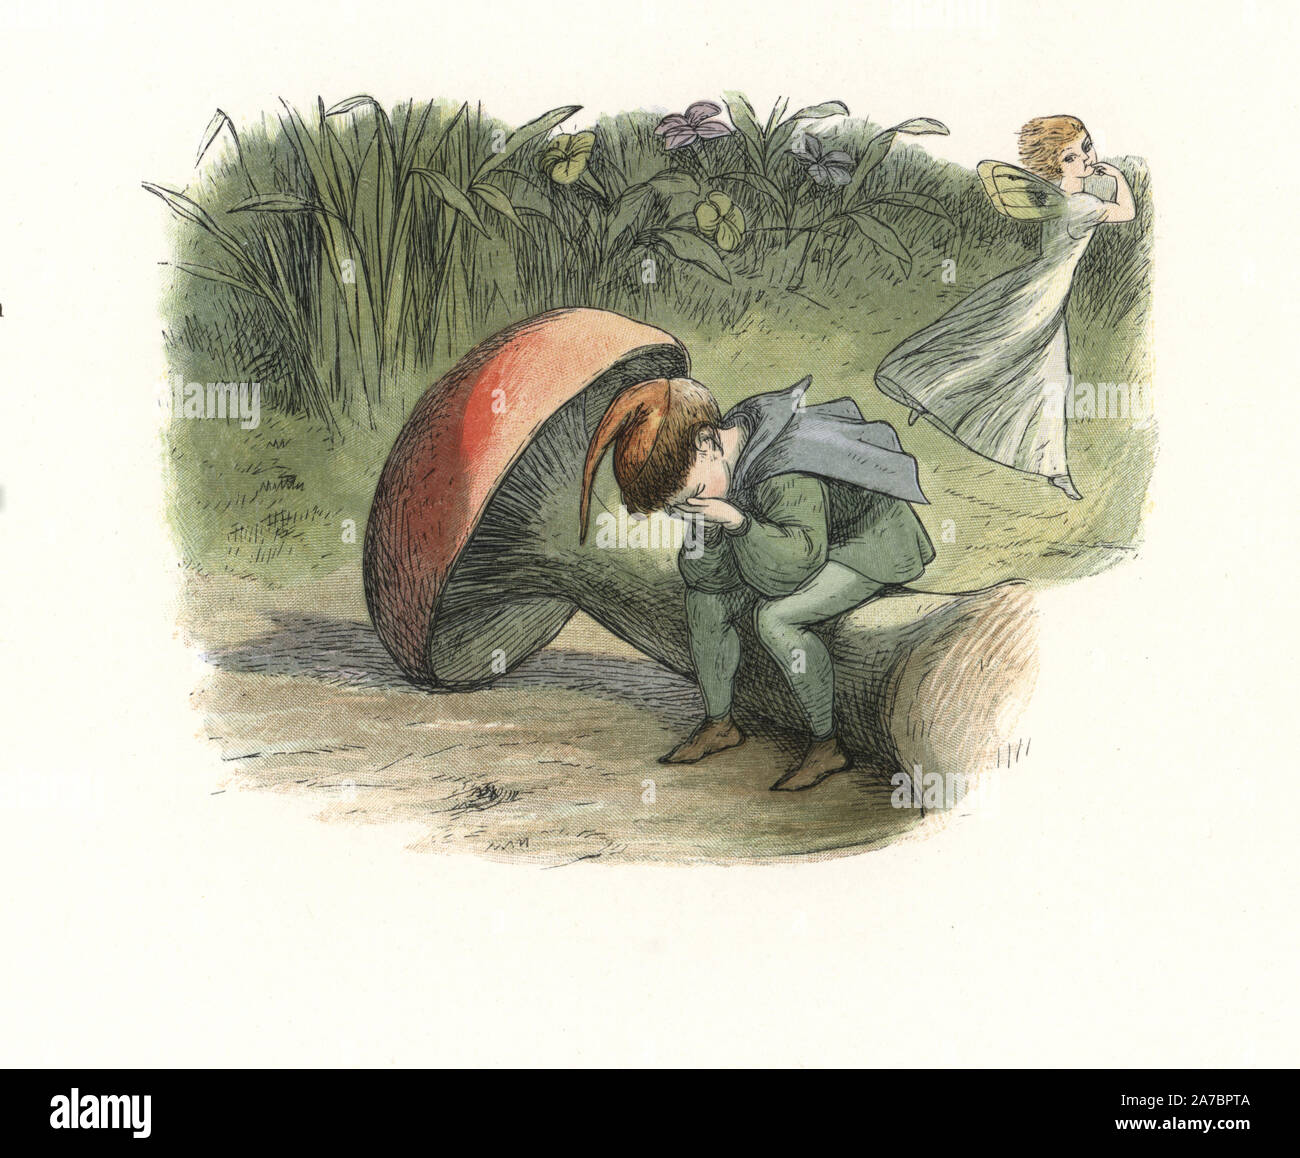 Elf sits brokenhearted on a fallen toadstool as a fairy runs away. Handcoloured woodblock print by Edmund Evans after an illustration by Richard Doyle from In Fairyland, a series of Pictures from the Elf World, Longman, London, 1870. Stock Photo